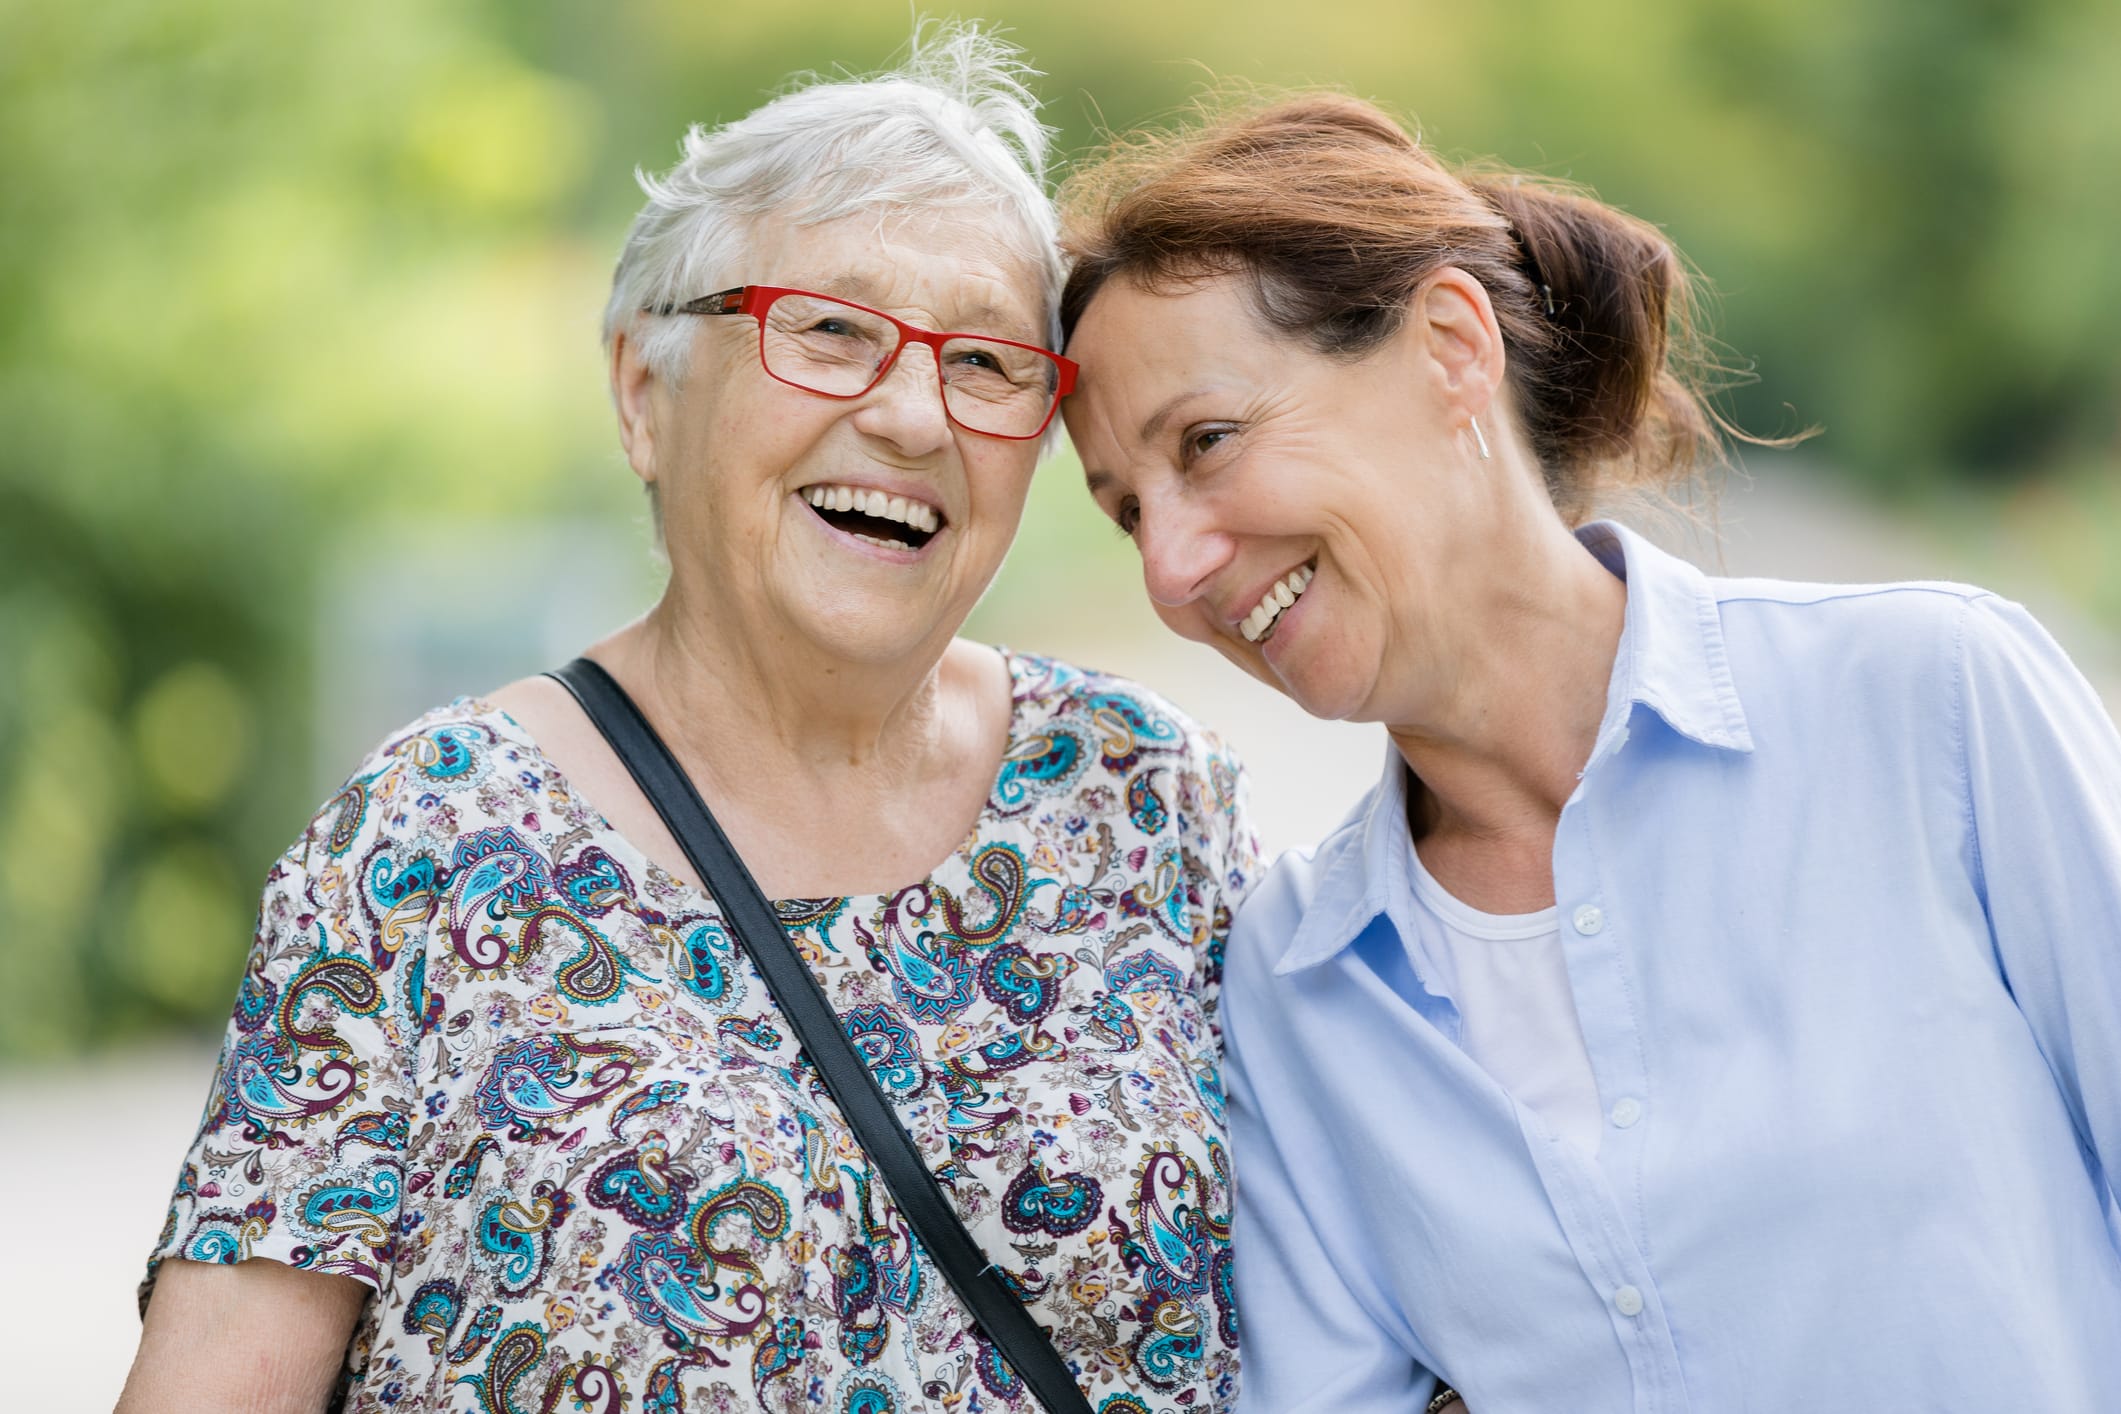 making a plan and communicating clearly makes the family caregiving process easier for all involved